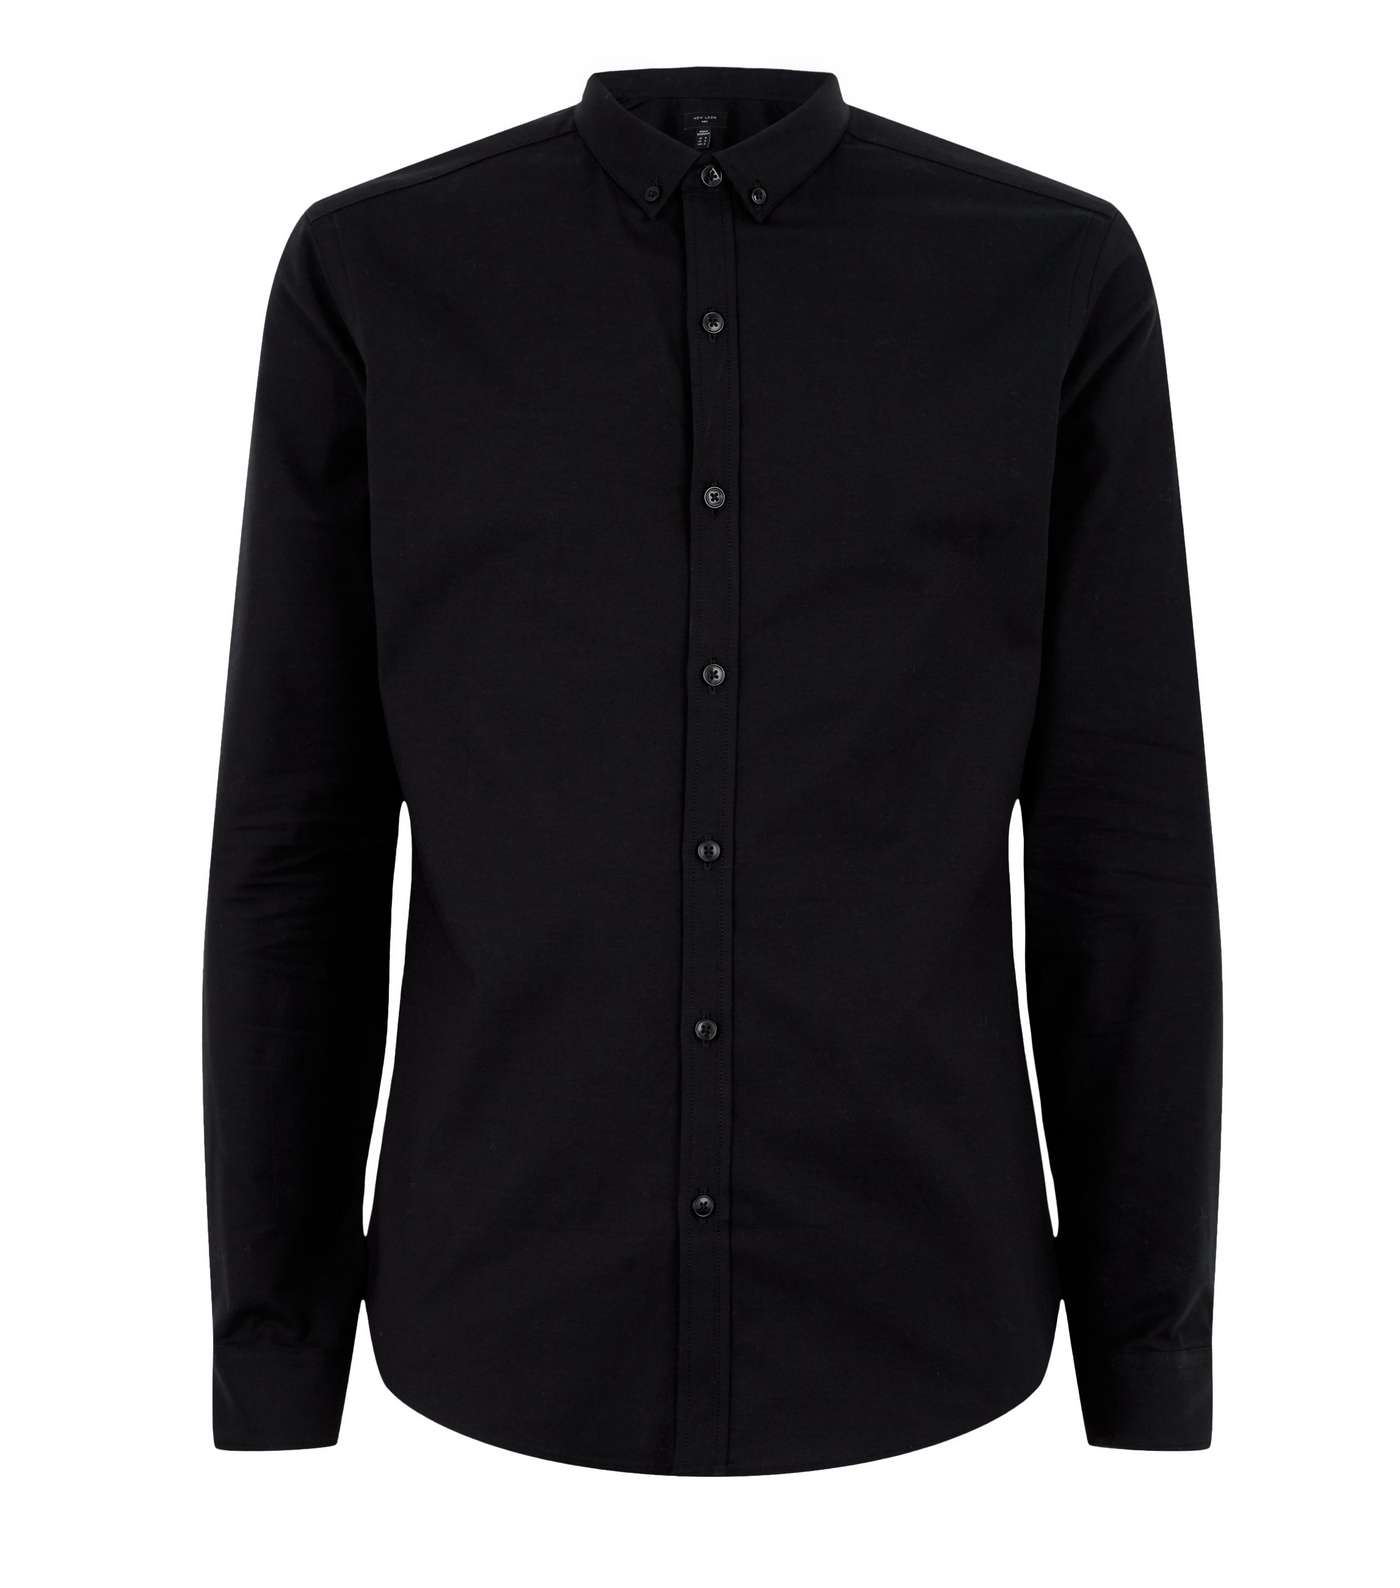 Black Muscle Fit Long Sleeve Oxford Shirt Image 4